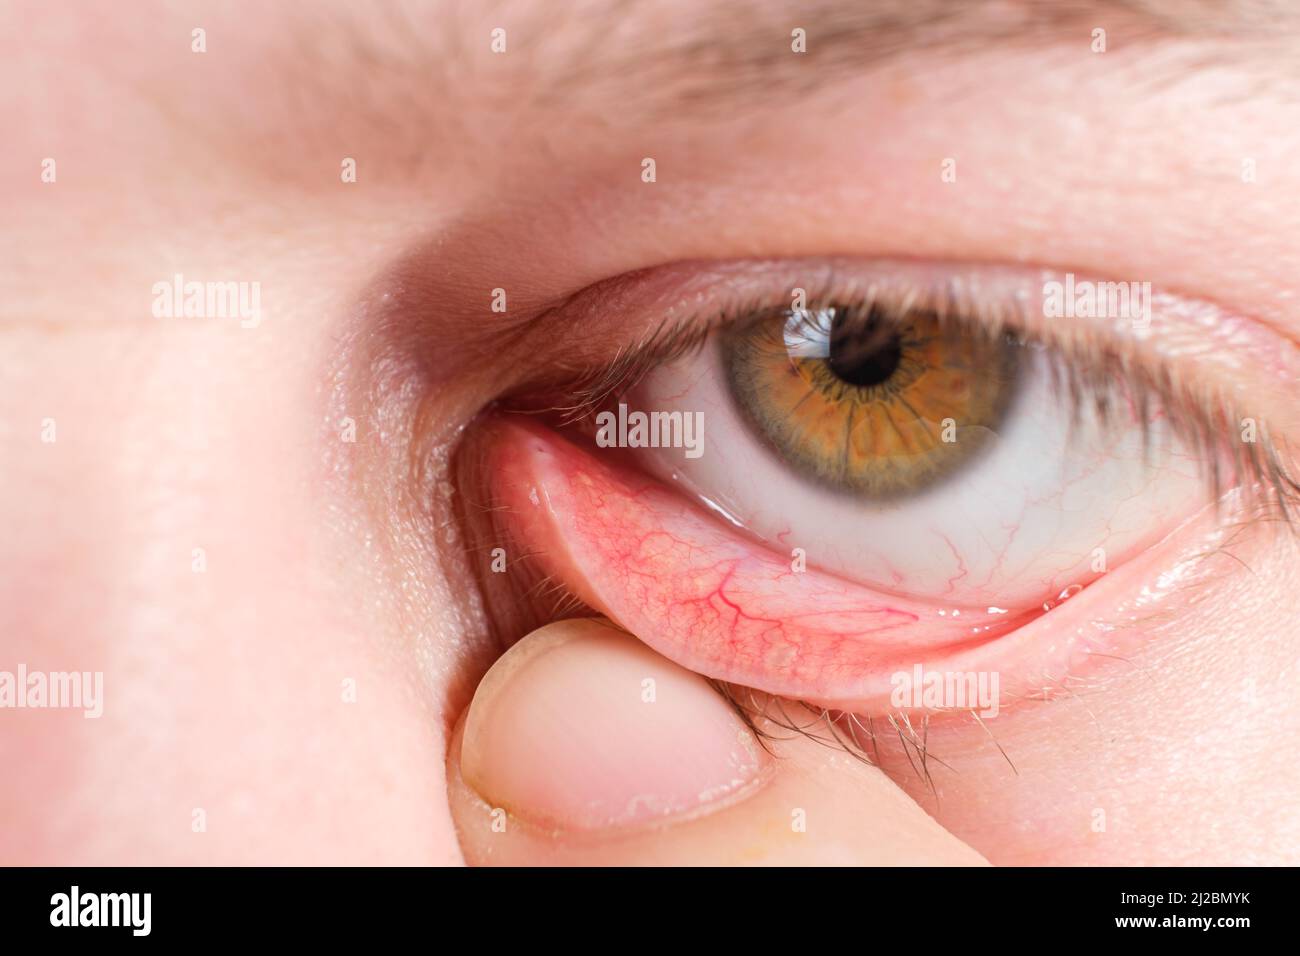 Red lower eyelid, a macro photo of the human eye. Conjunctivitis, inflammation of the mucous membrane of the eye. Stock Photo